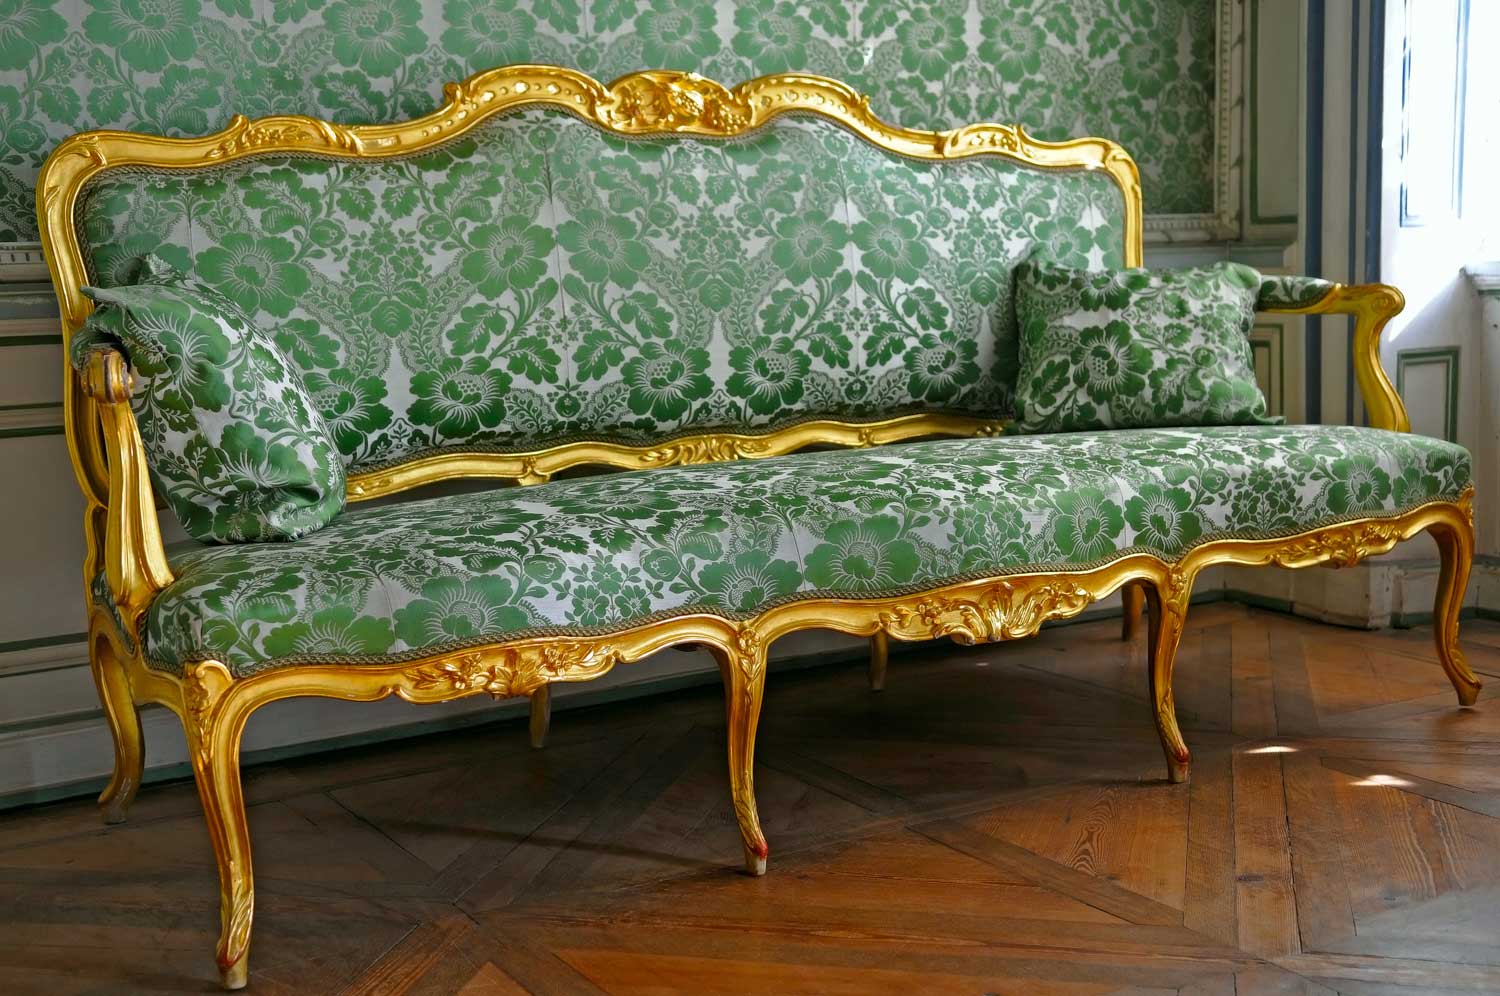 50 French provincial and classical custom made furniture